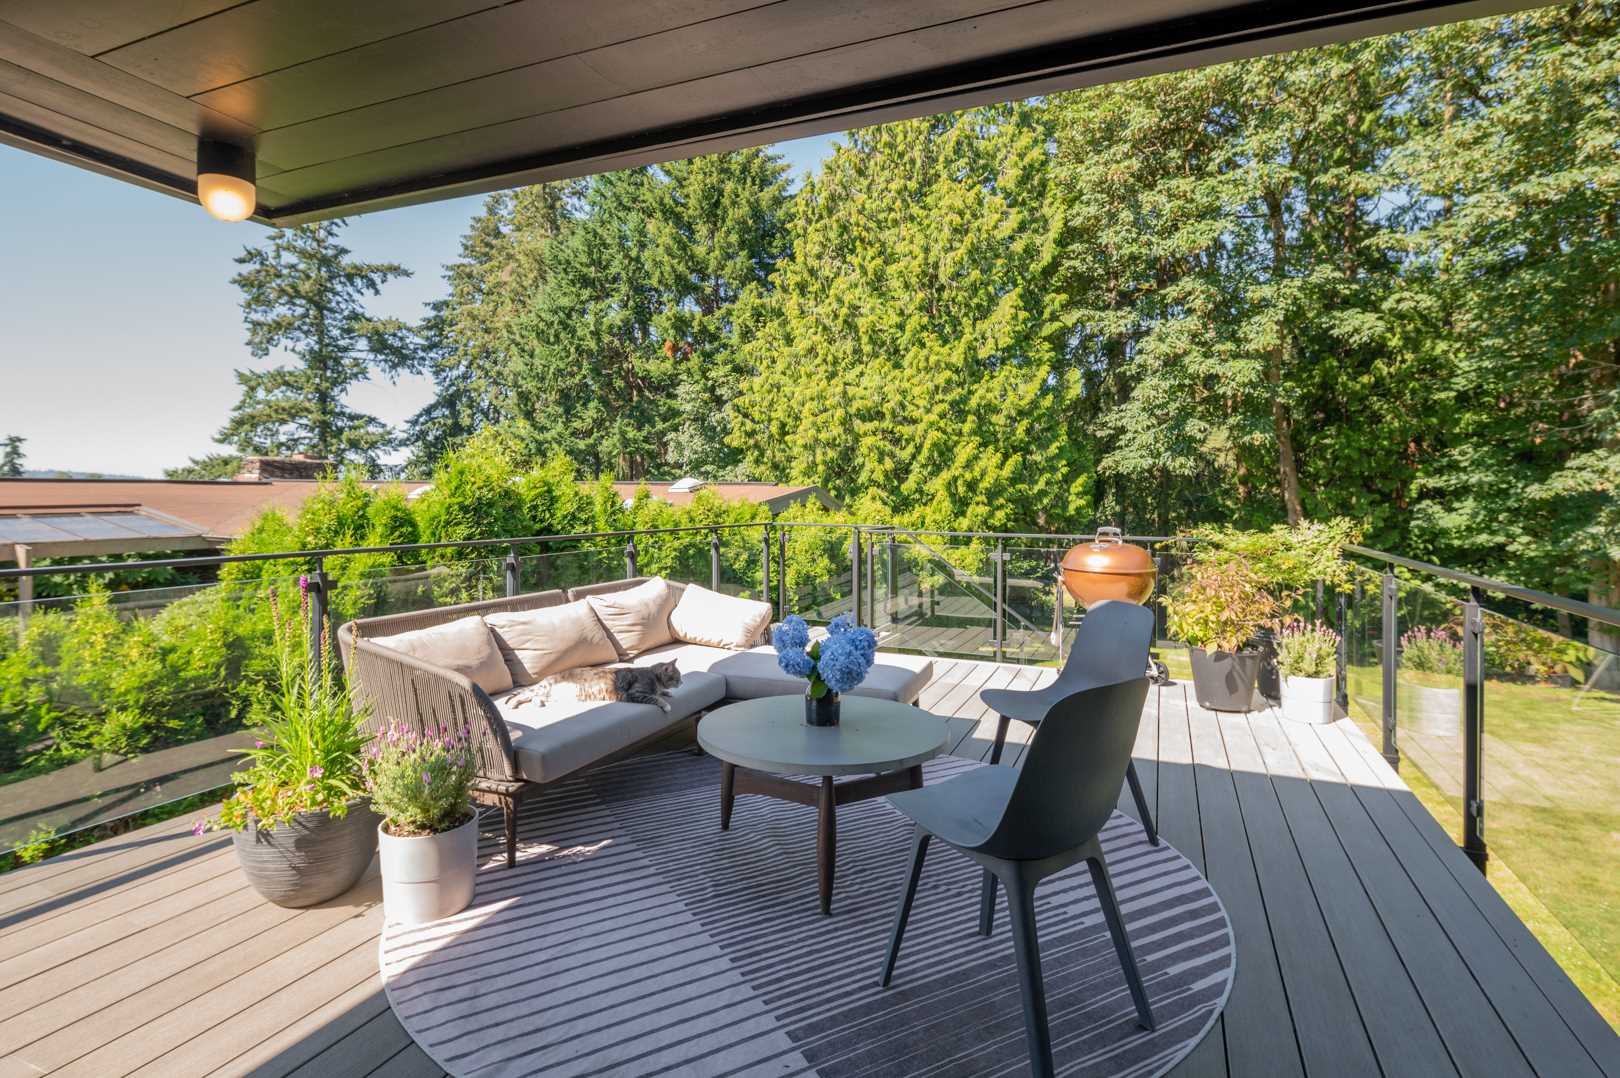 A new partially shaded deck adds extra living space to this renovated home.